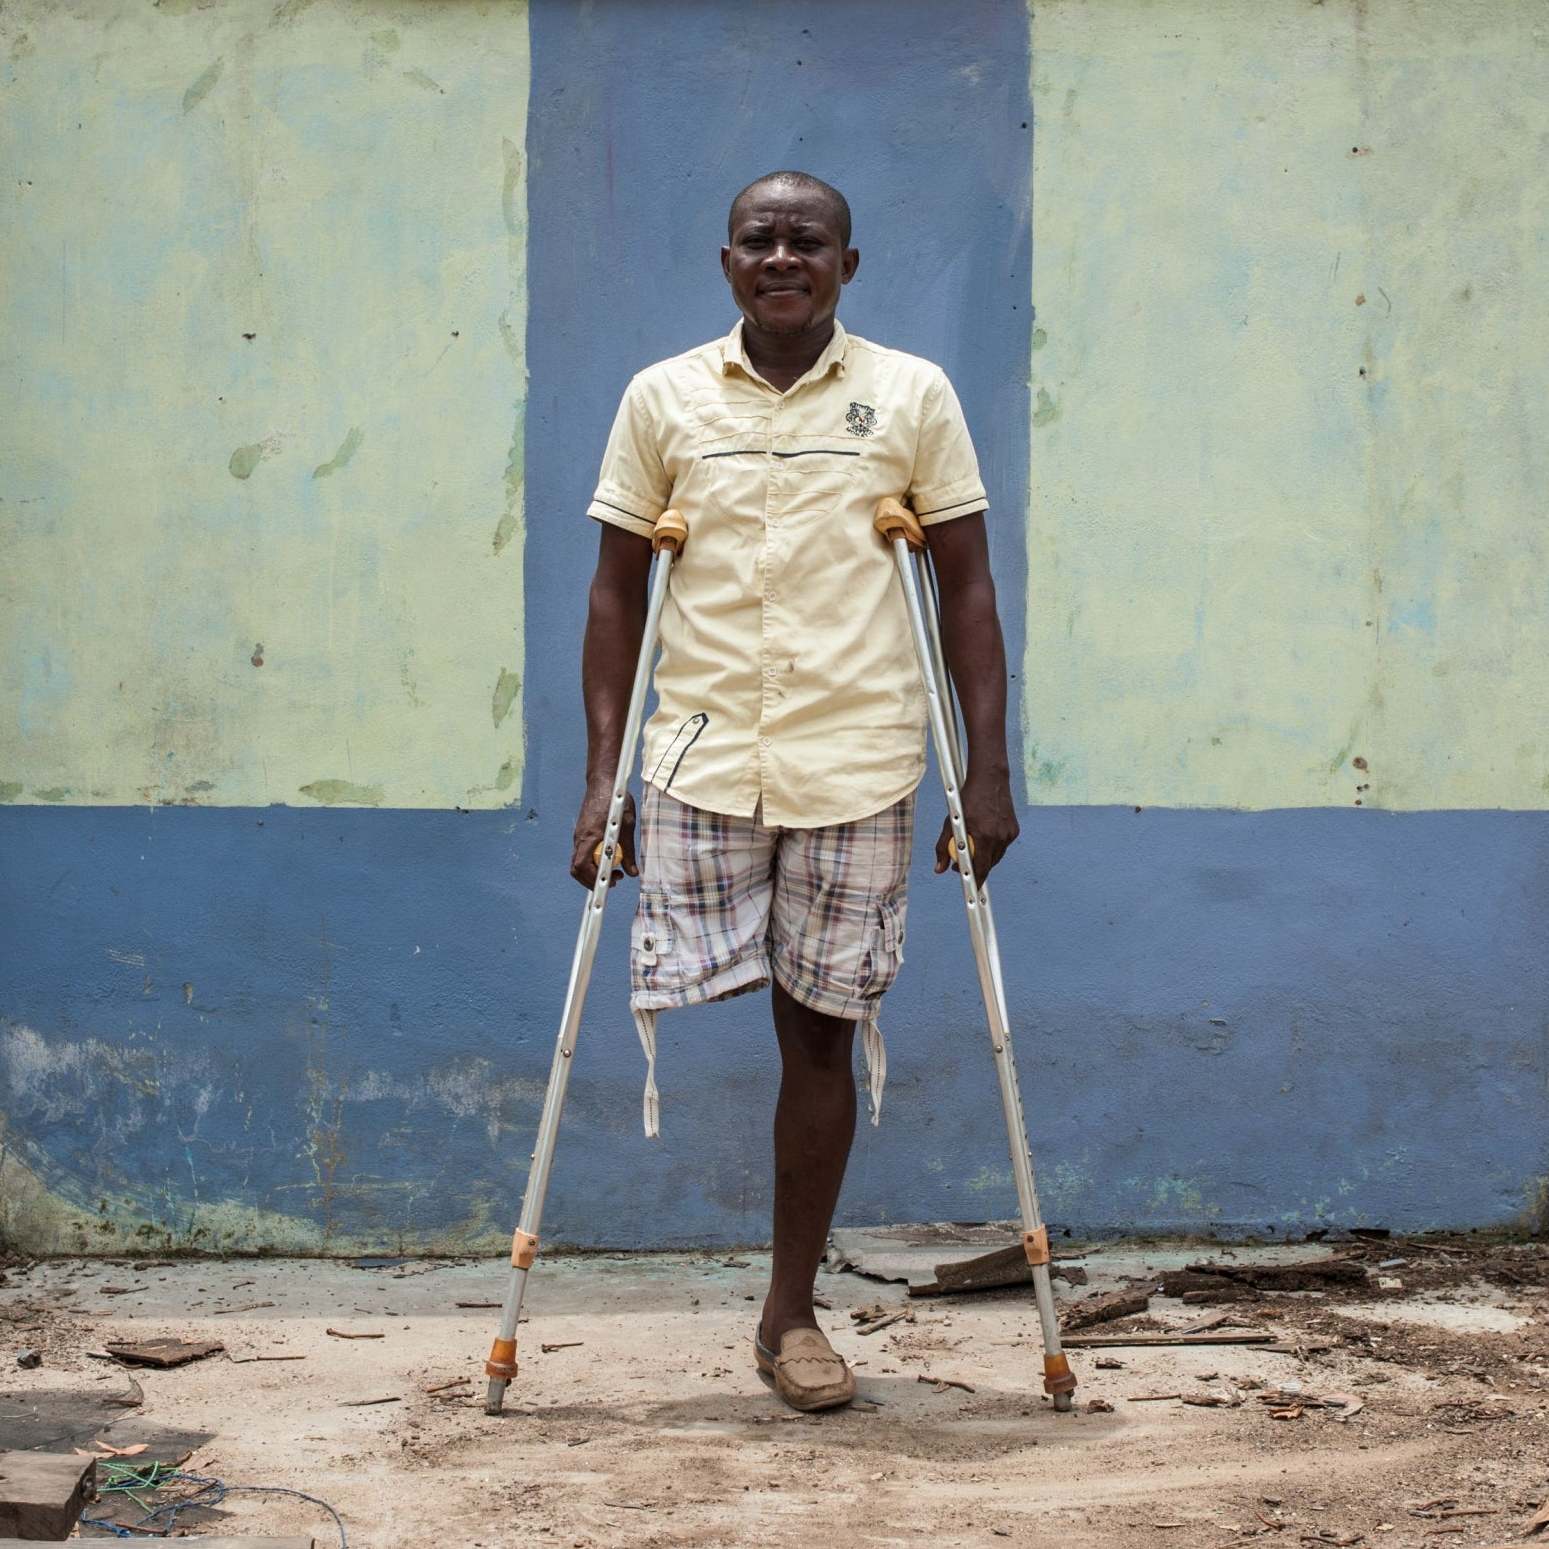 Amarachi Onyemaechi lost a leg during a pro-Biafra protest in 2015